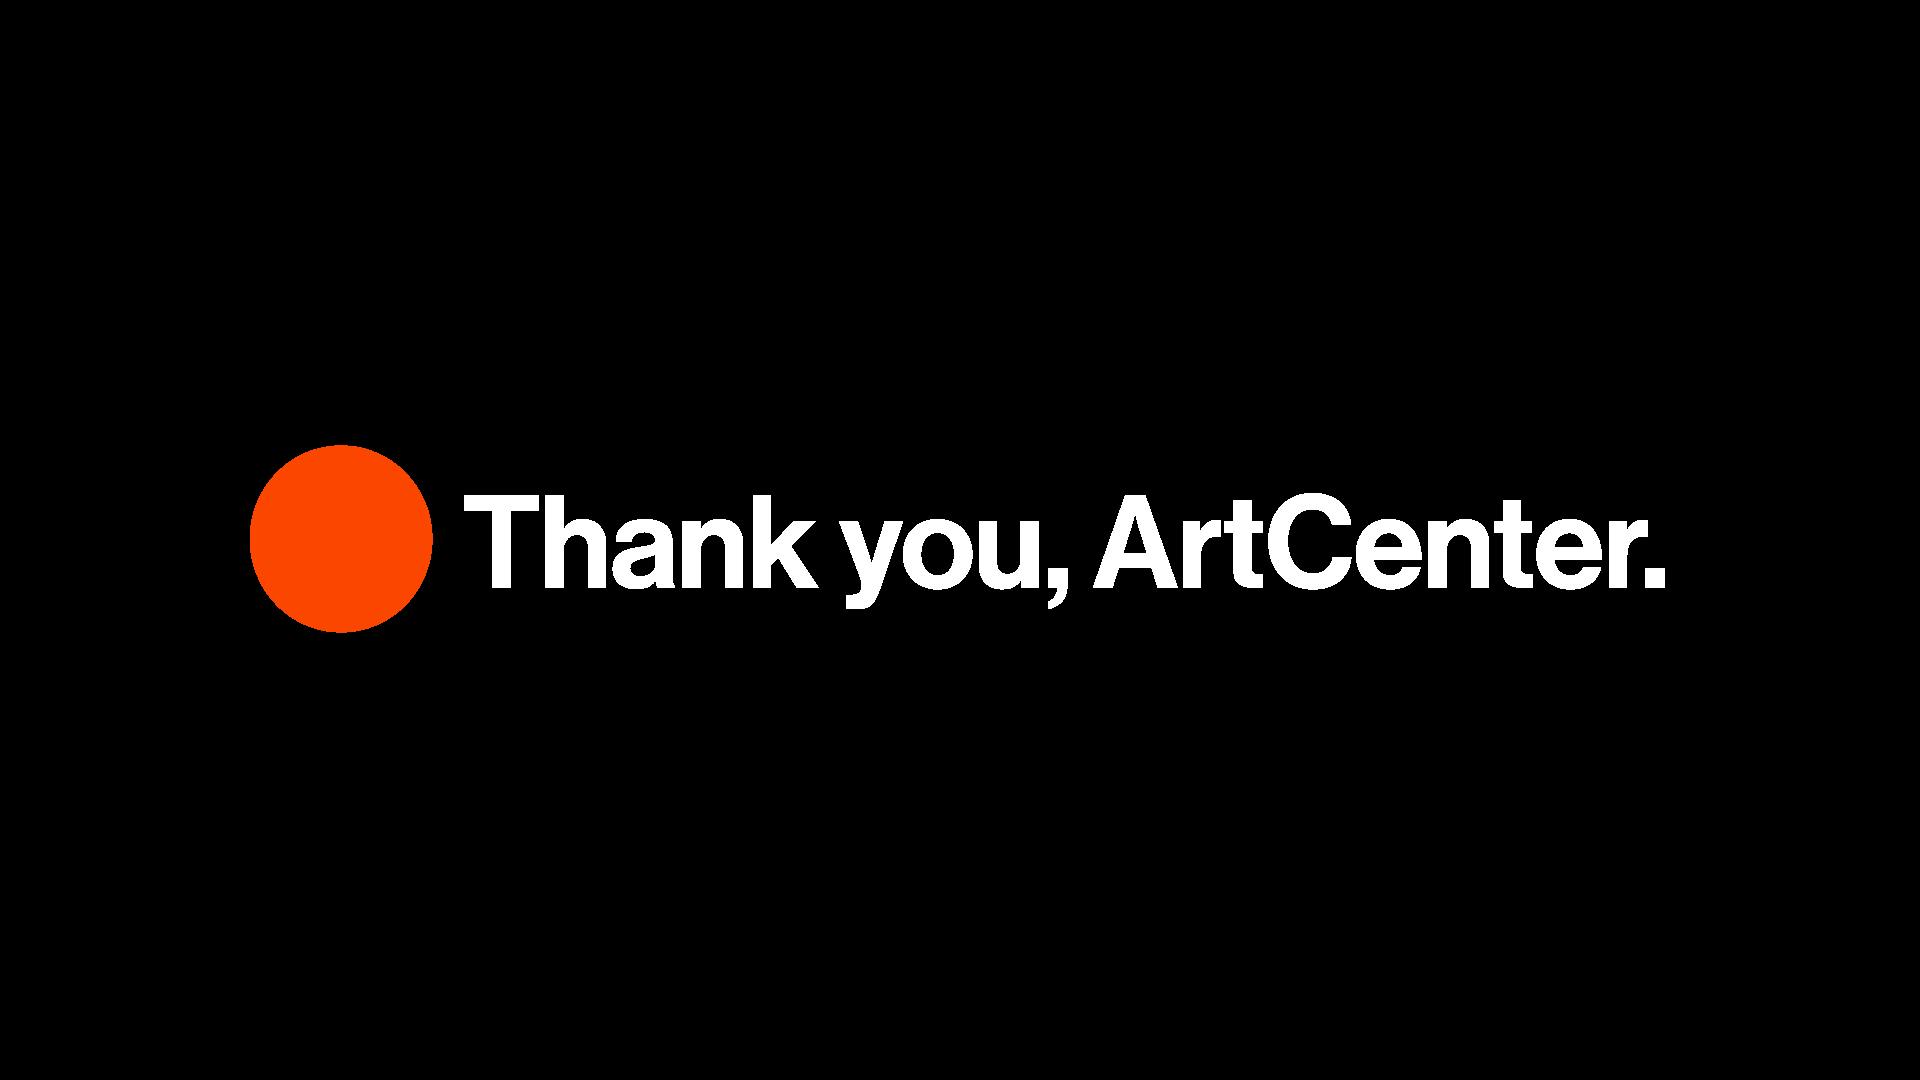 Animation of the ArtCenter logo, revealing text which says, “Thank you, ArtCenter.”